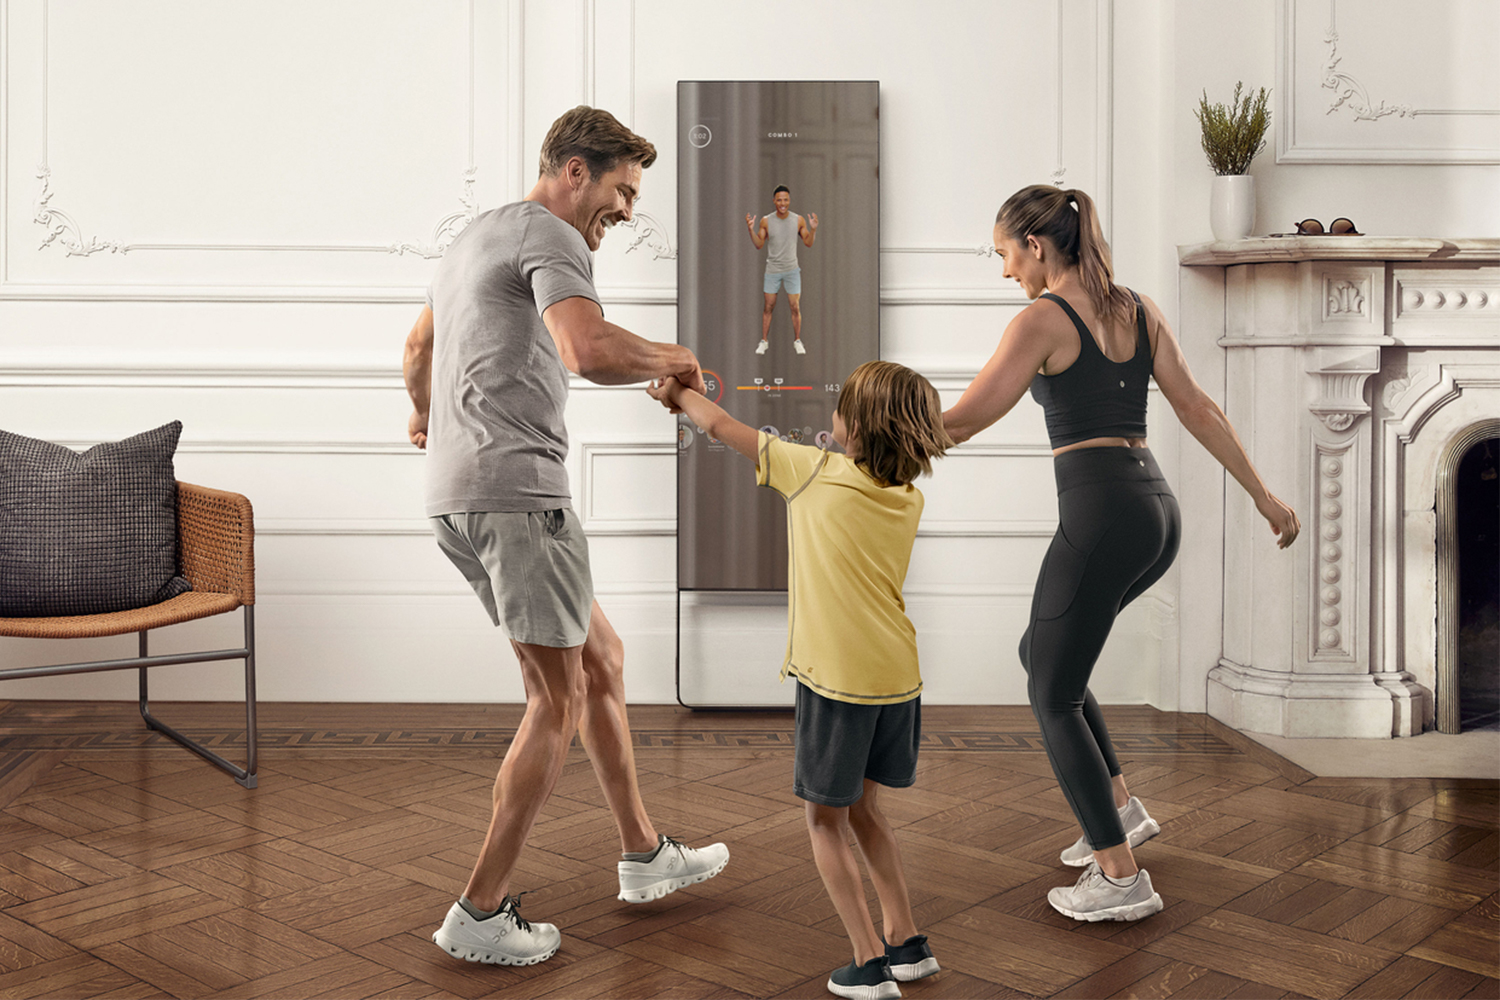 A mom, dad and young son working out with the Mirror, a home fitness machine. The exercise programming includes "Family Fun" classes which are meant to be done with kids under 12.